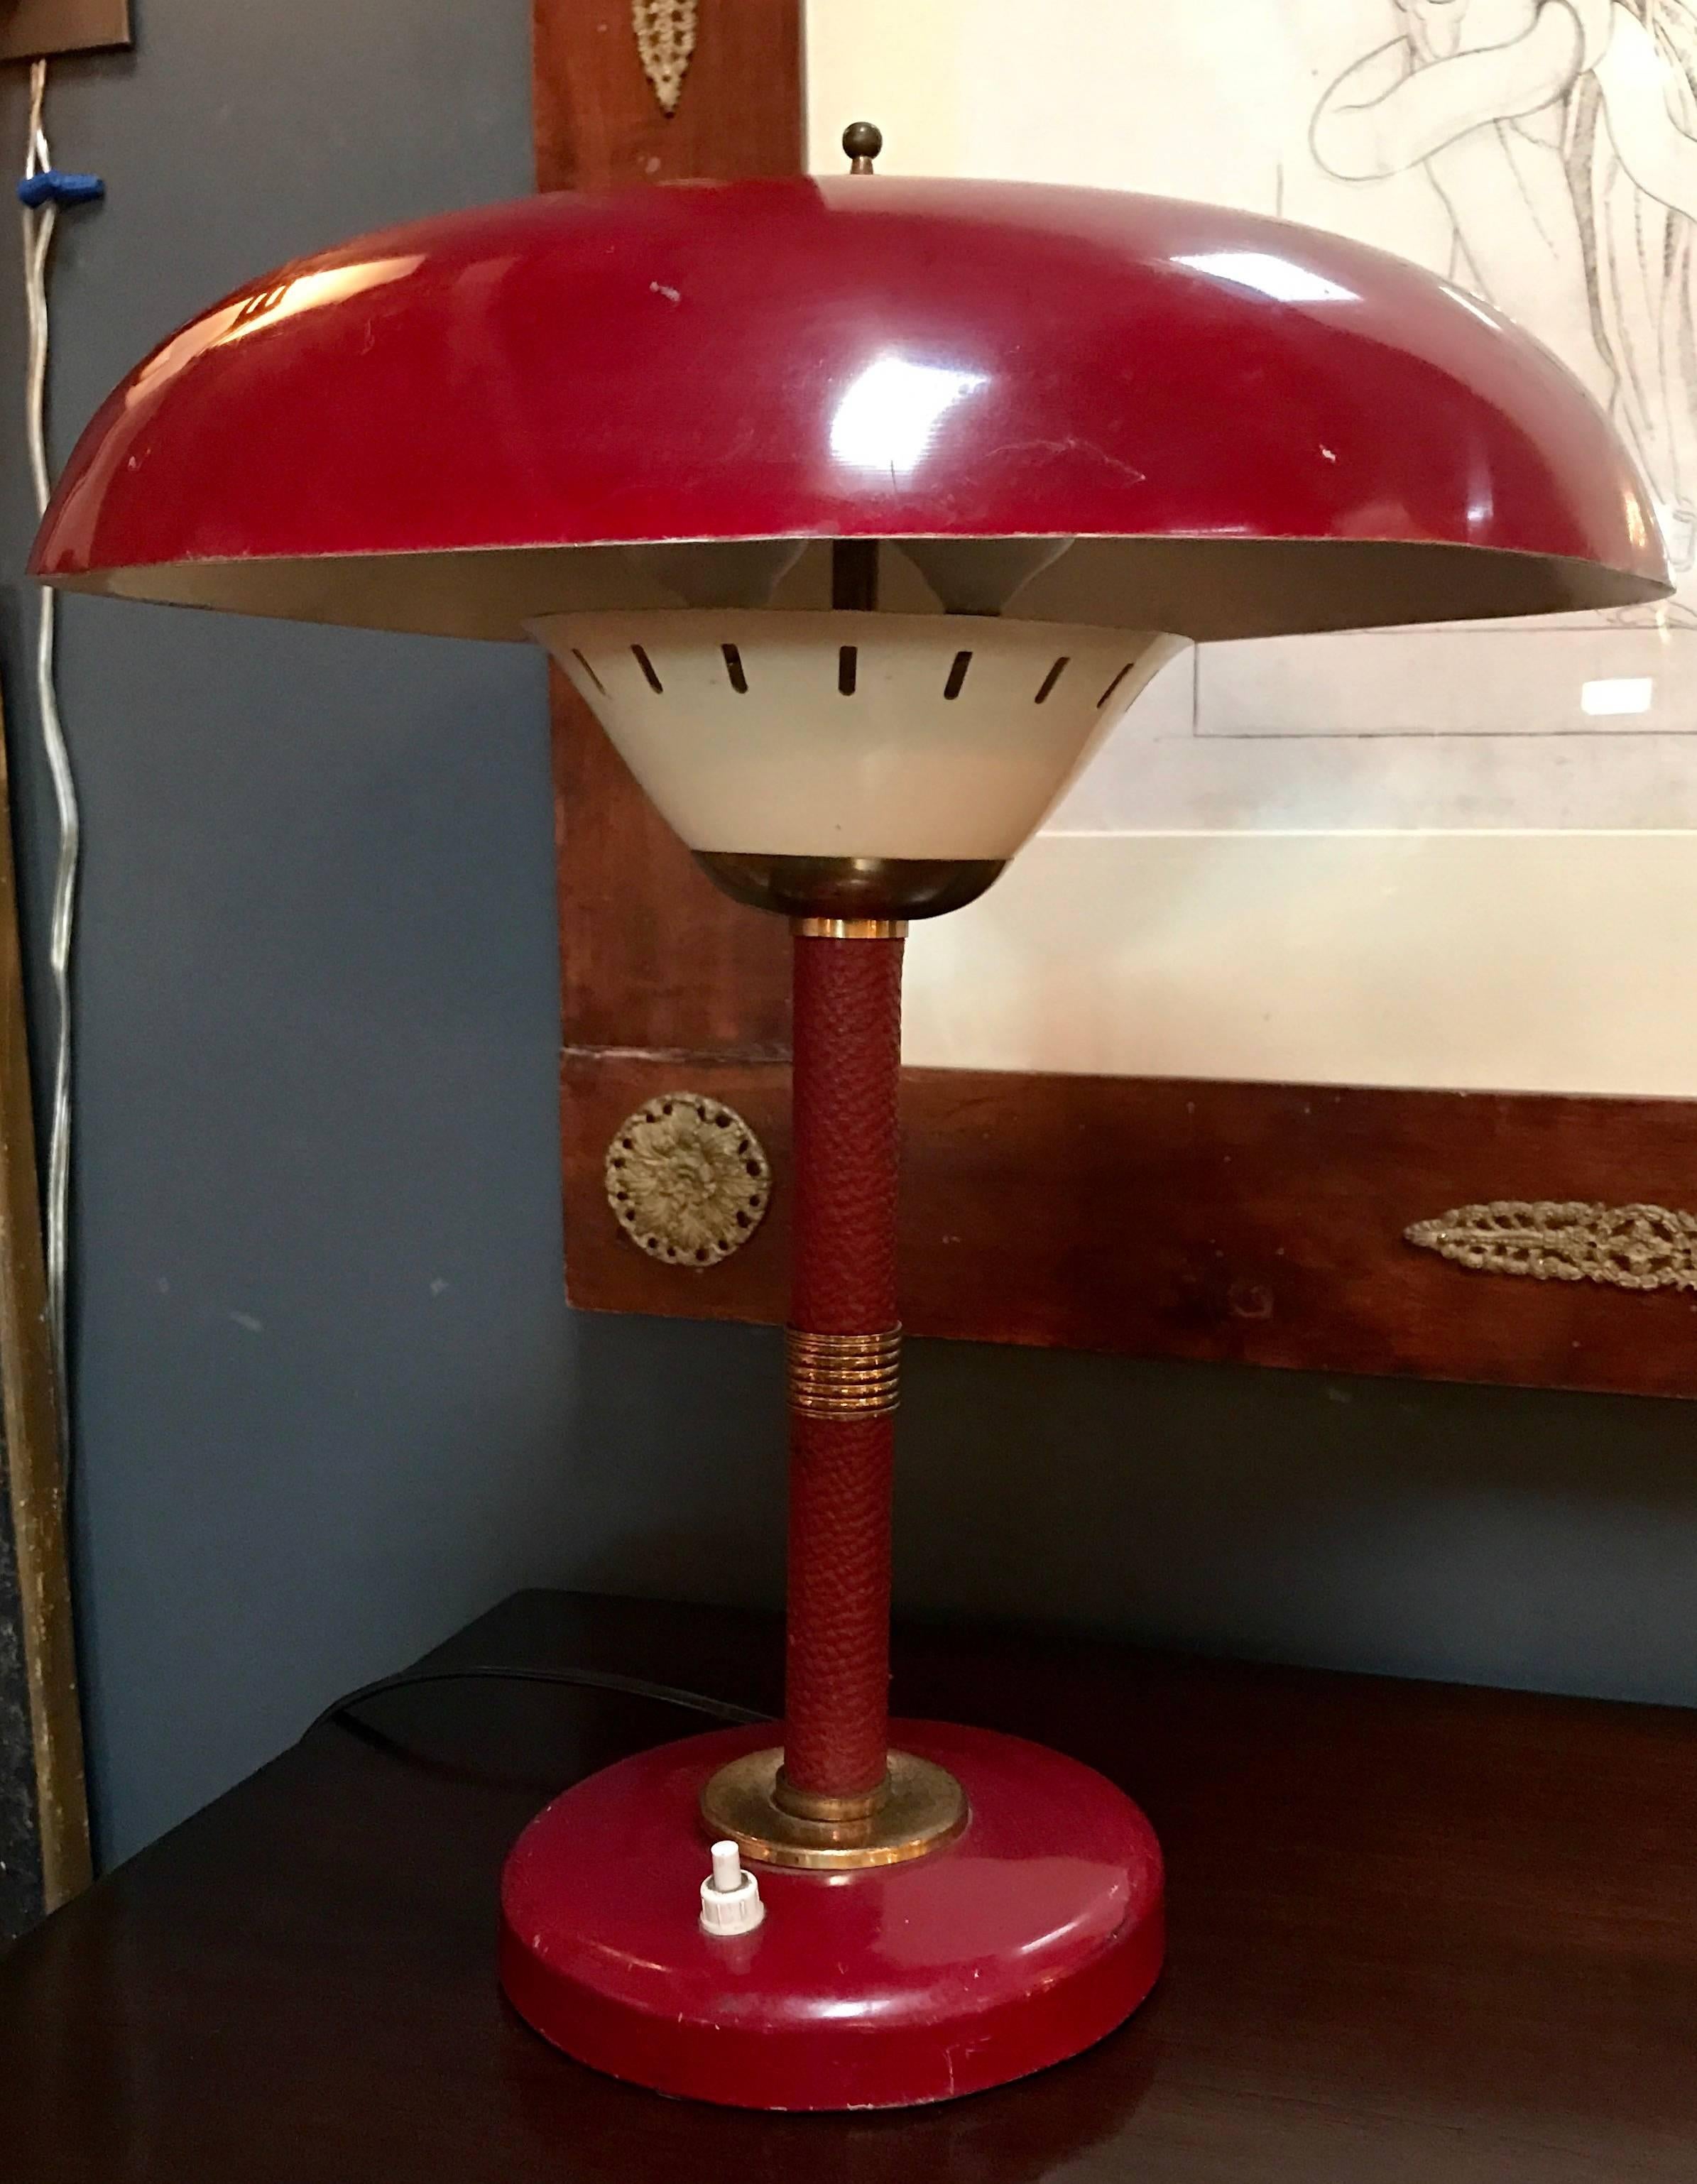 Italian table lamp 1950s whit original red leather and brass.
Attributed to Arredoluce
Sassy!